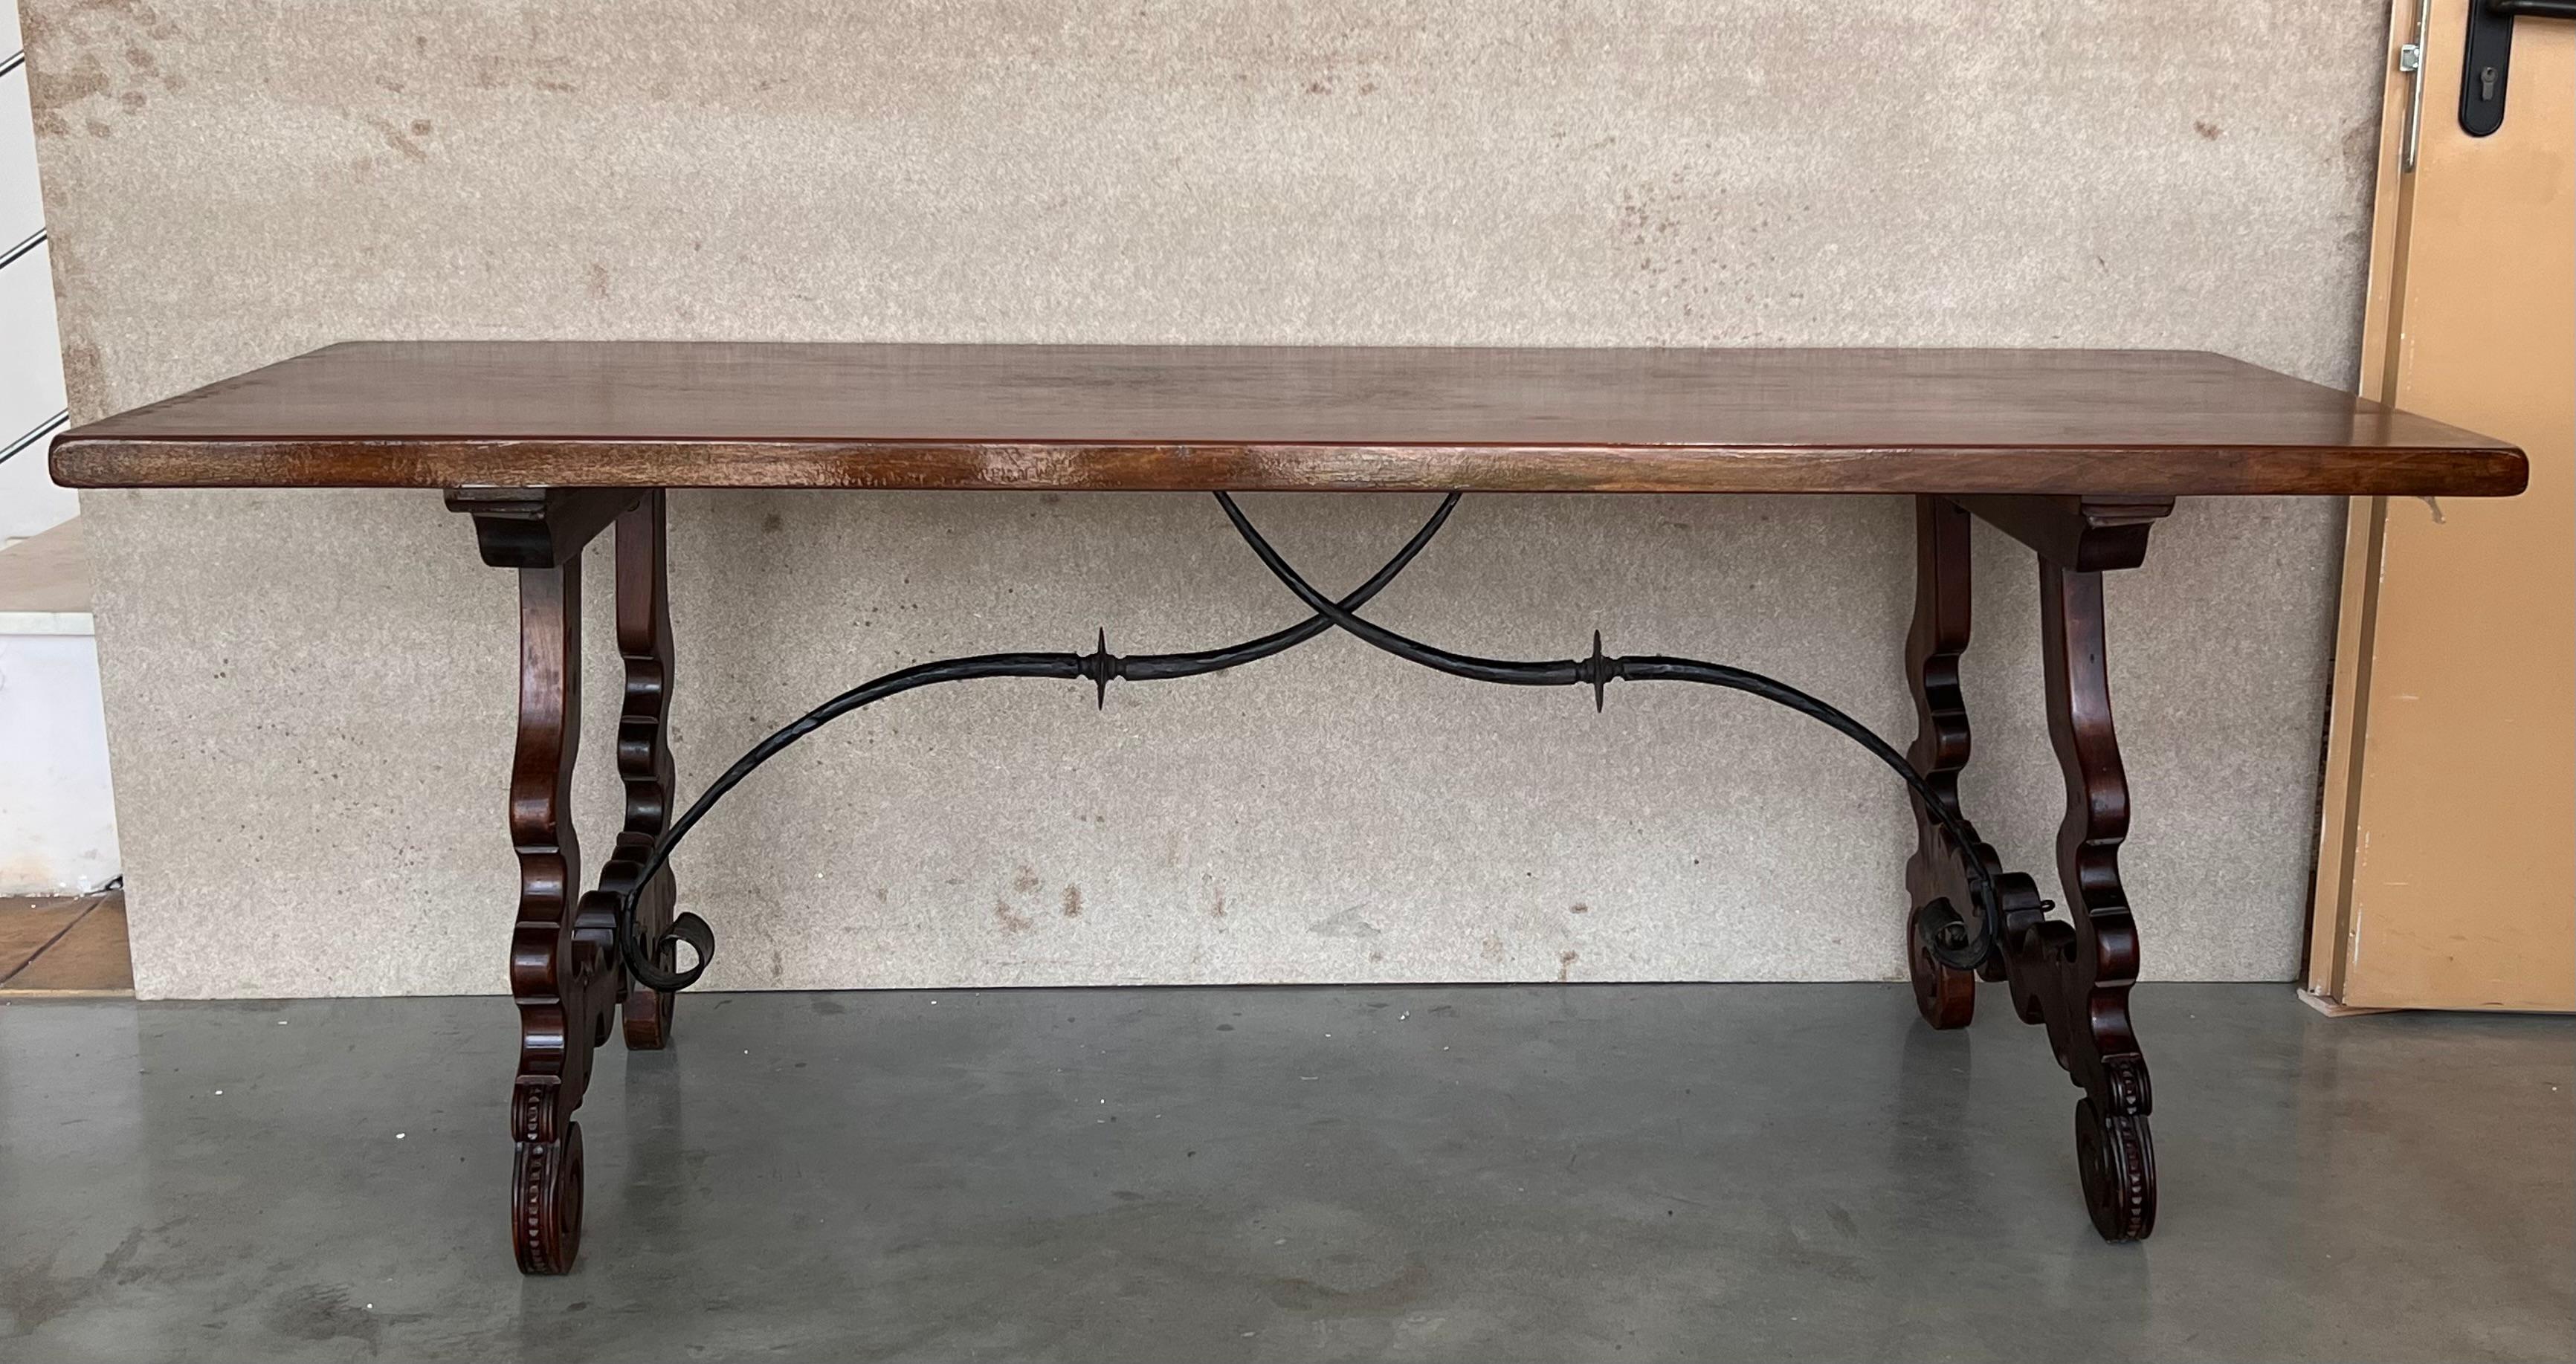 A monumental 20th century Spanish trestle table, having a rectangular framed solid walnut inset board top, resting on hand carved, classical lyre legs joined by four beautifully iron stretchers.
The legs have a handmade carved with typical motifs